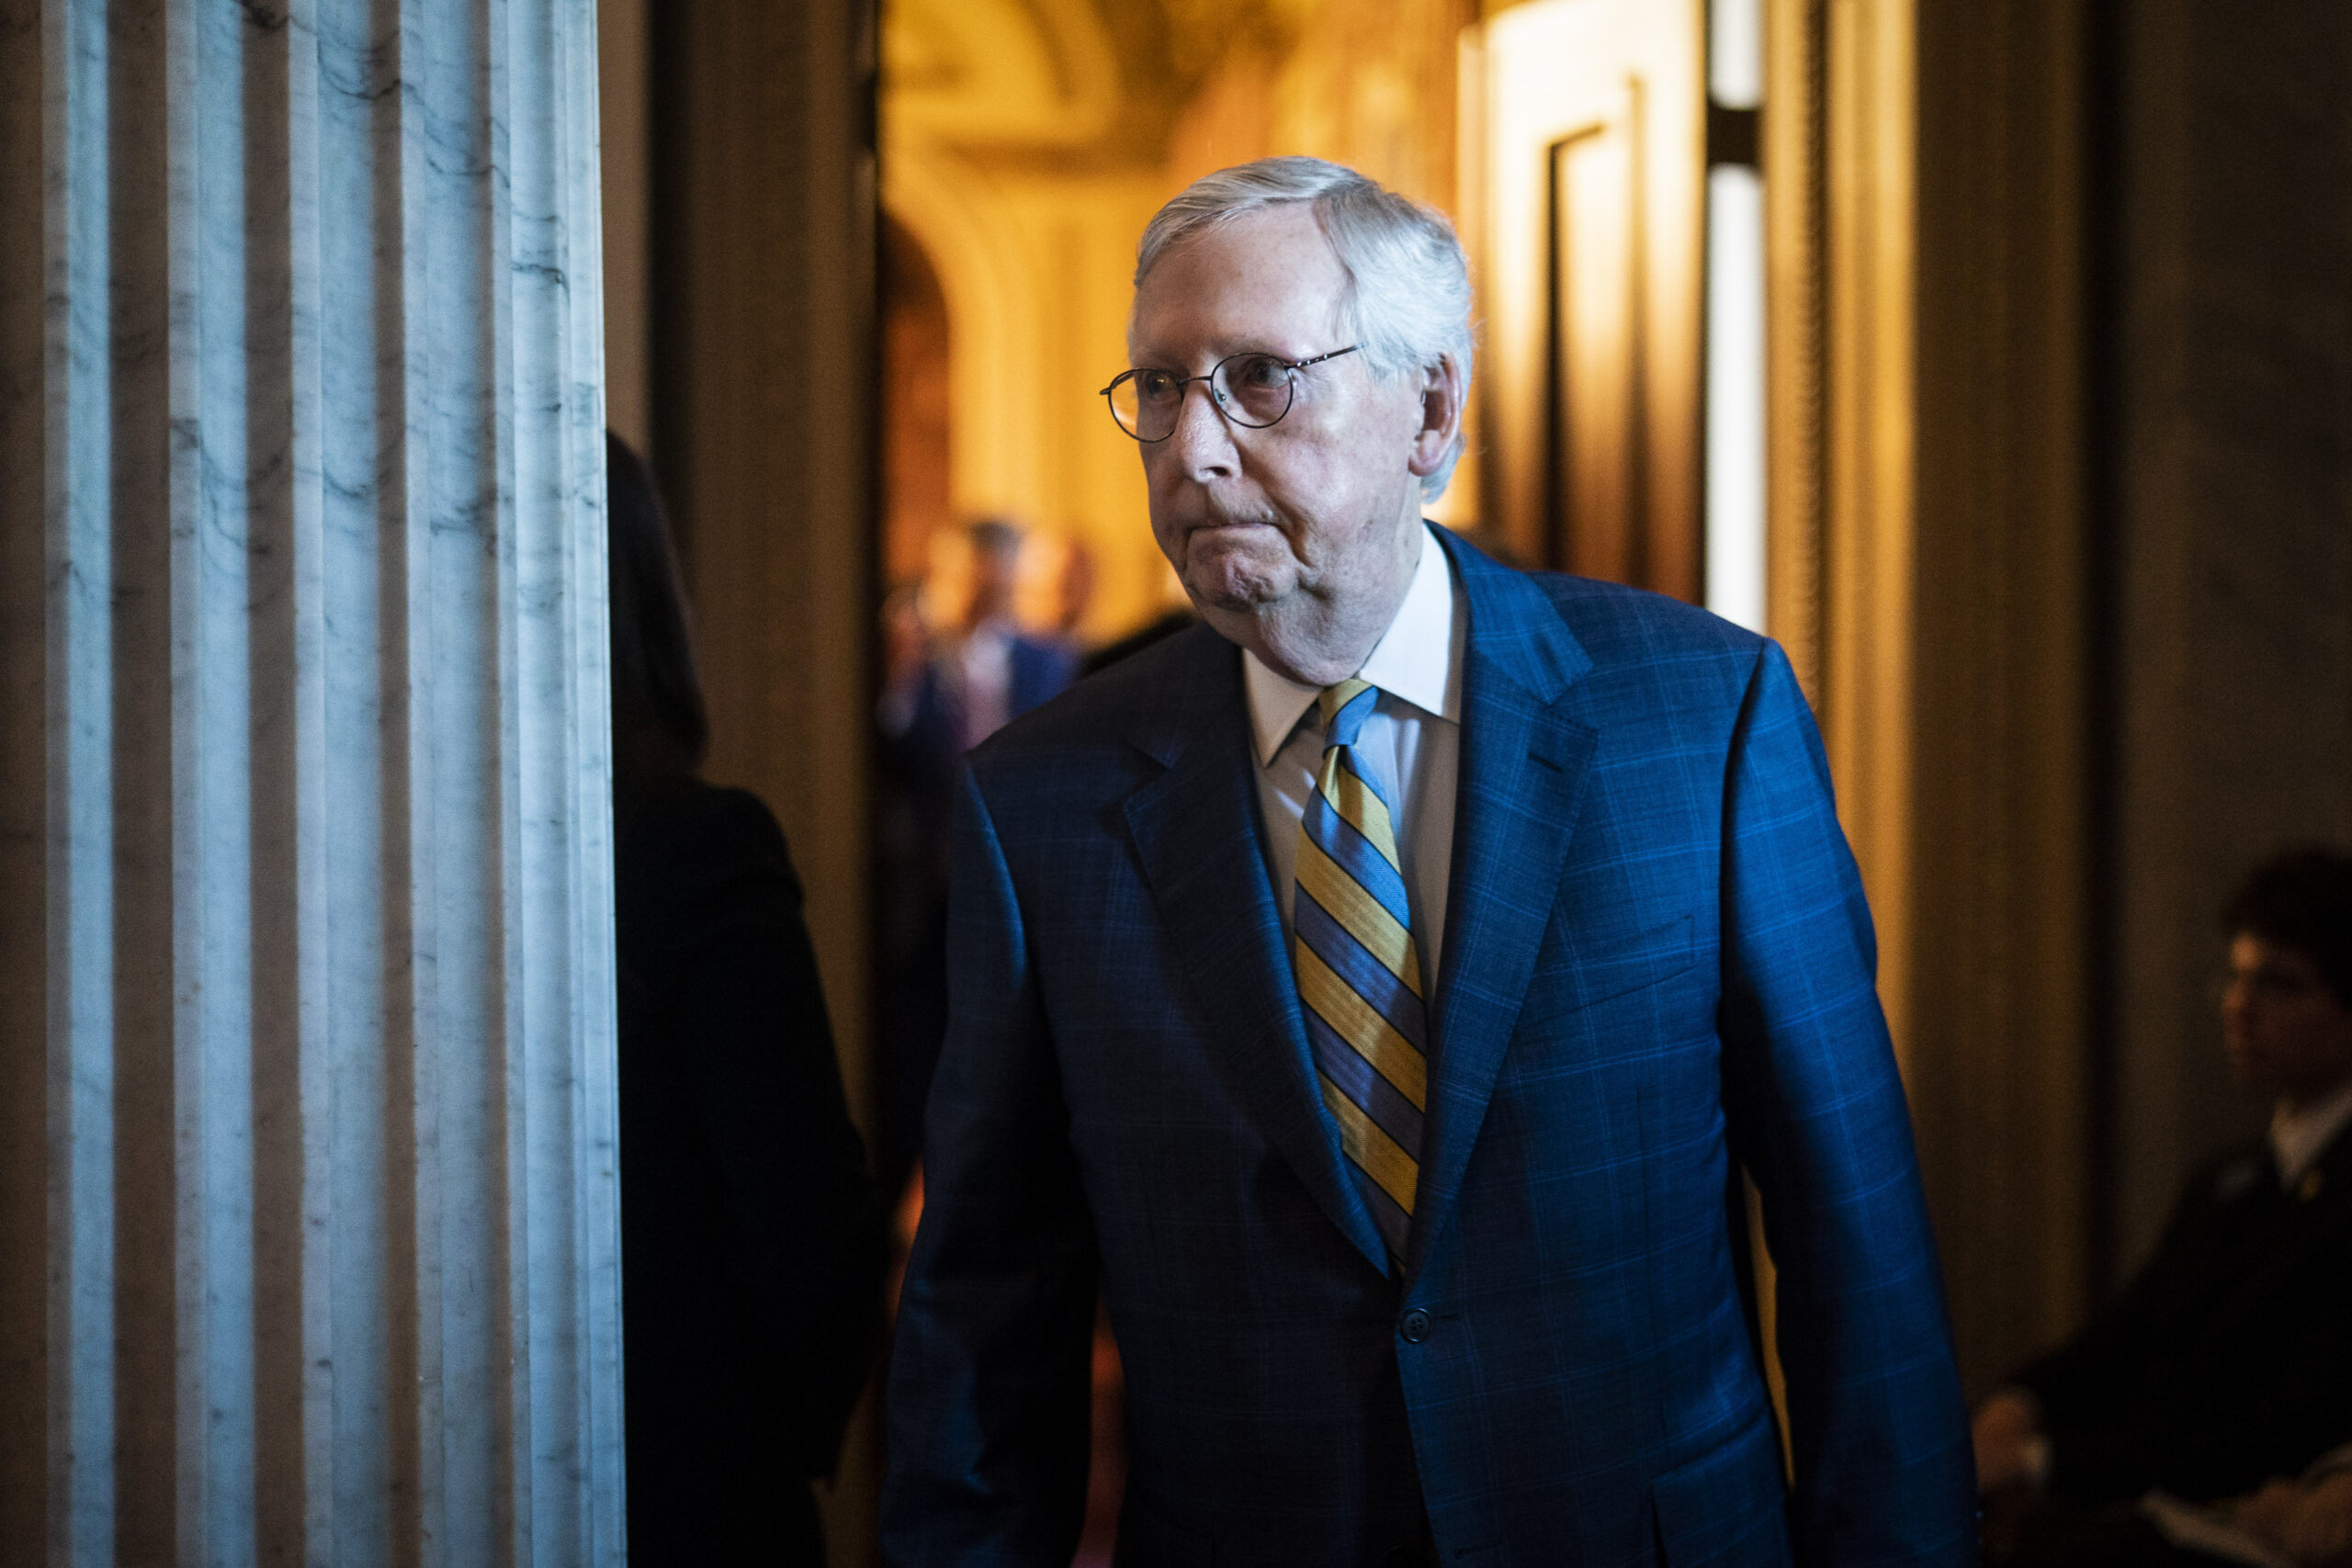 Senate Minority Leader Mitch McConnell Returns Home After Treatment For Fall, Concussion